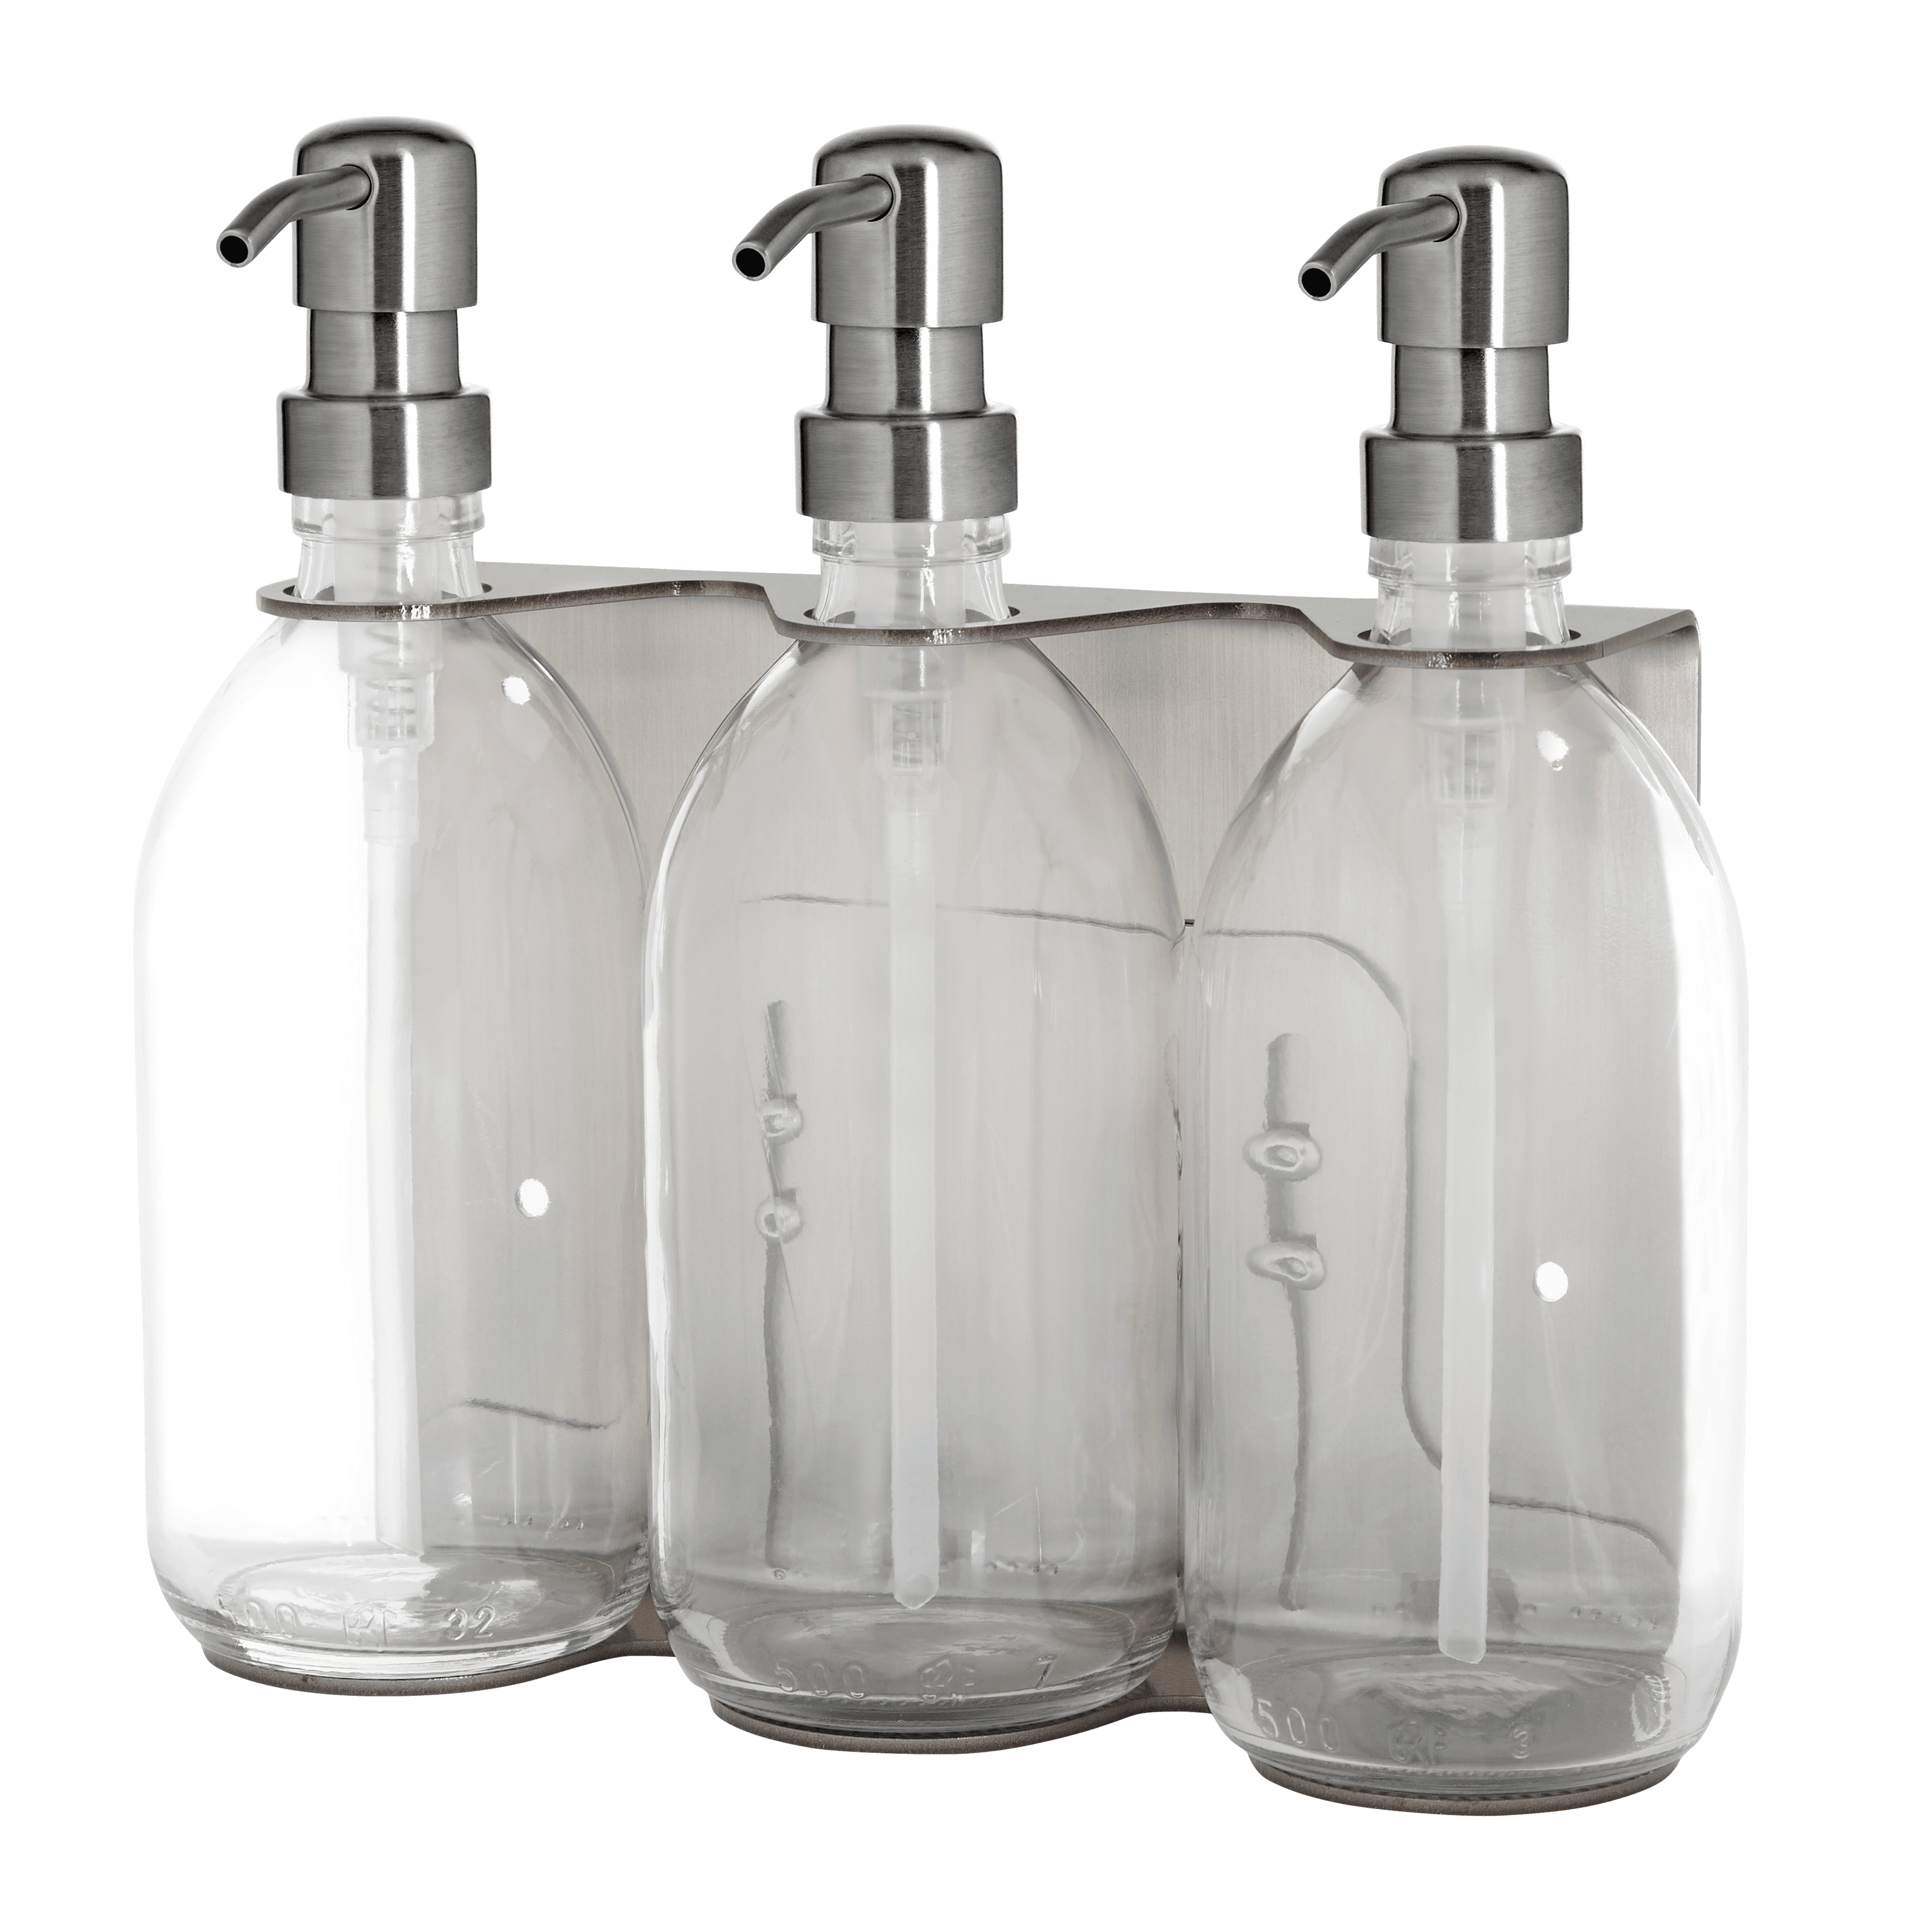 Triple Satin silver Wall mounted Holder with Clear Bottles with silver metal pumps